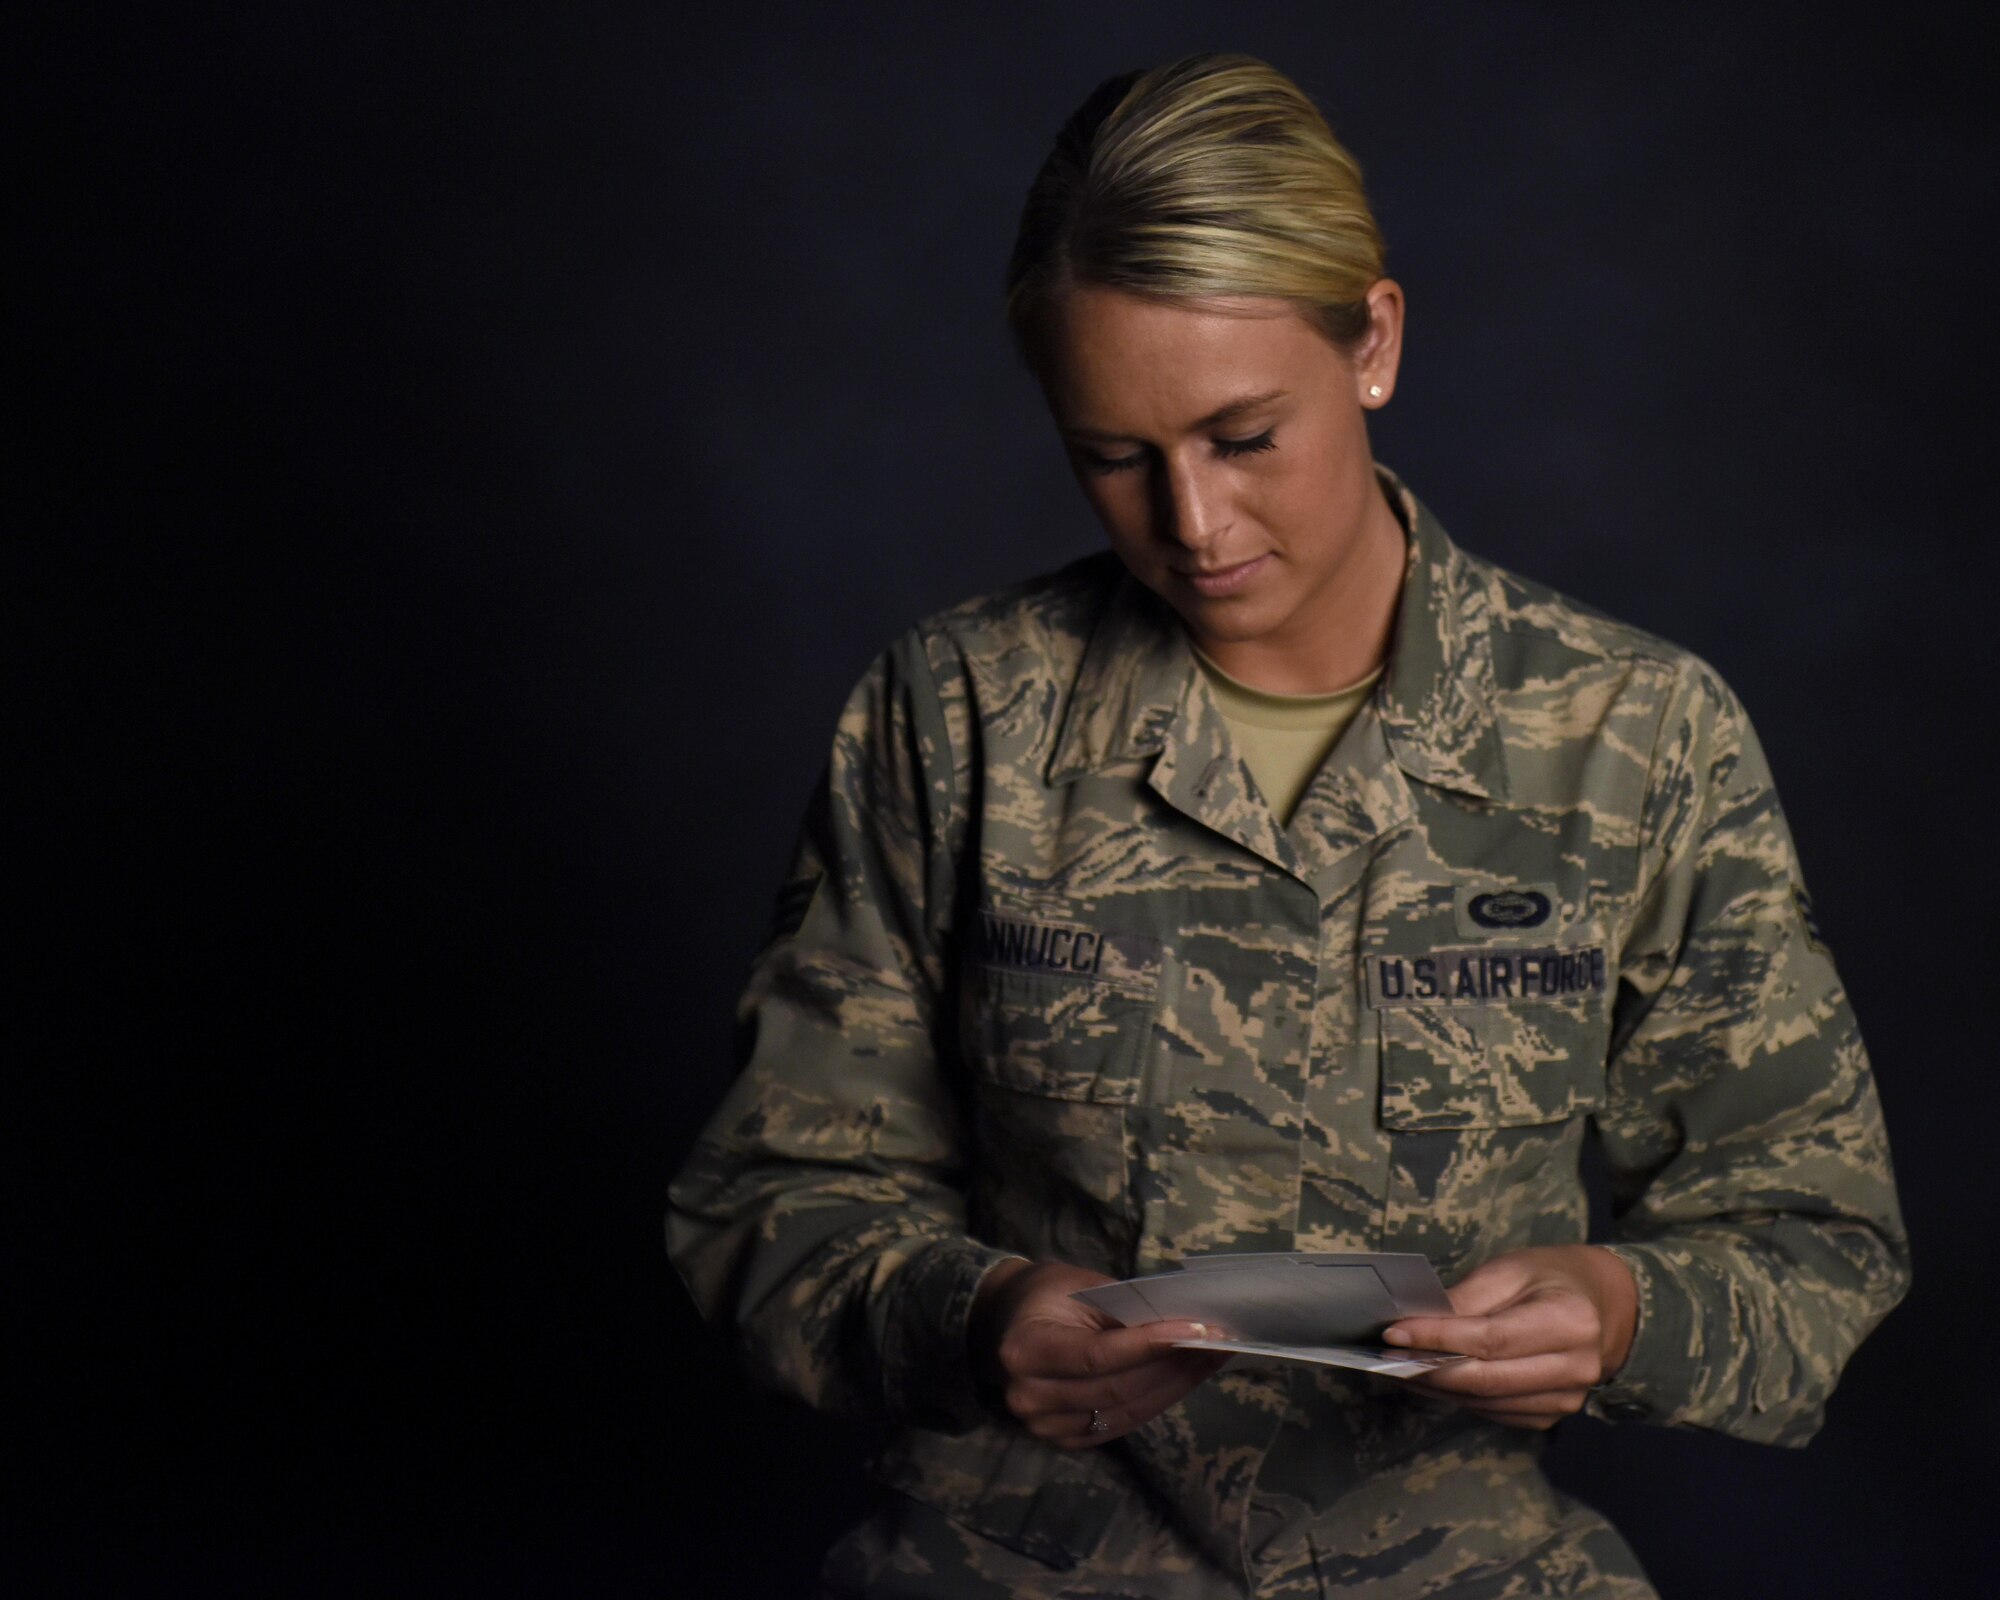 U.S. Air Force Senior Airman Courtney Iannucci, an intelligence specialist assigned to the 180th Fighter Wing, looks through photos from her three-week volunteer trip to Ghana to care for orphans, March 12, 2017, at the 180FW. Airmen focus on service before self through volunteering in their communities both locally and globally. (U.S. Air National Guard photo by Airman Hope Geiger)